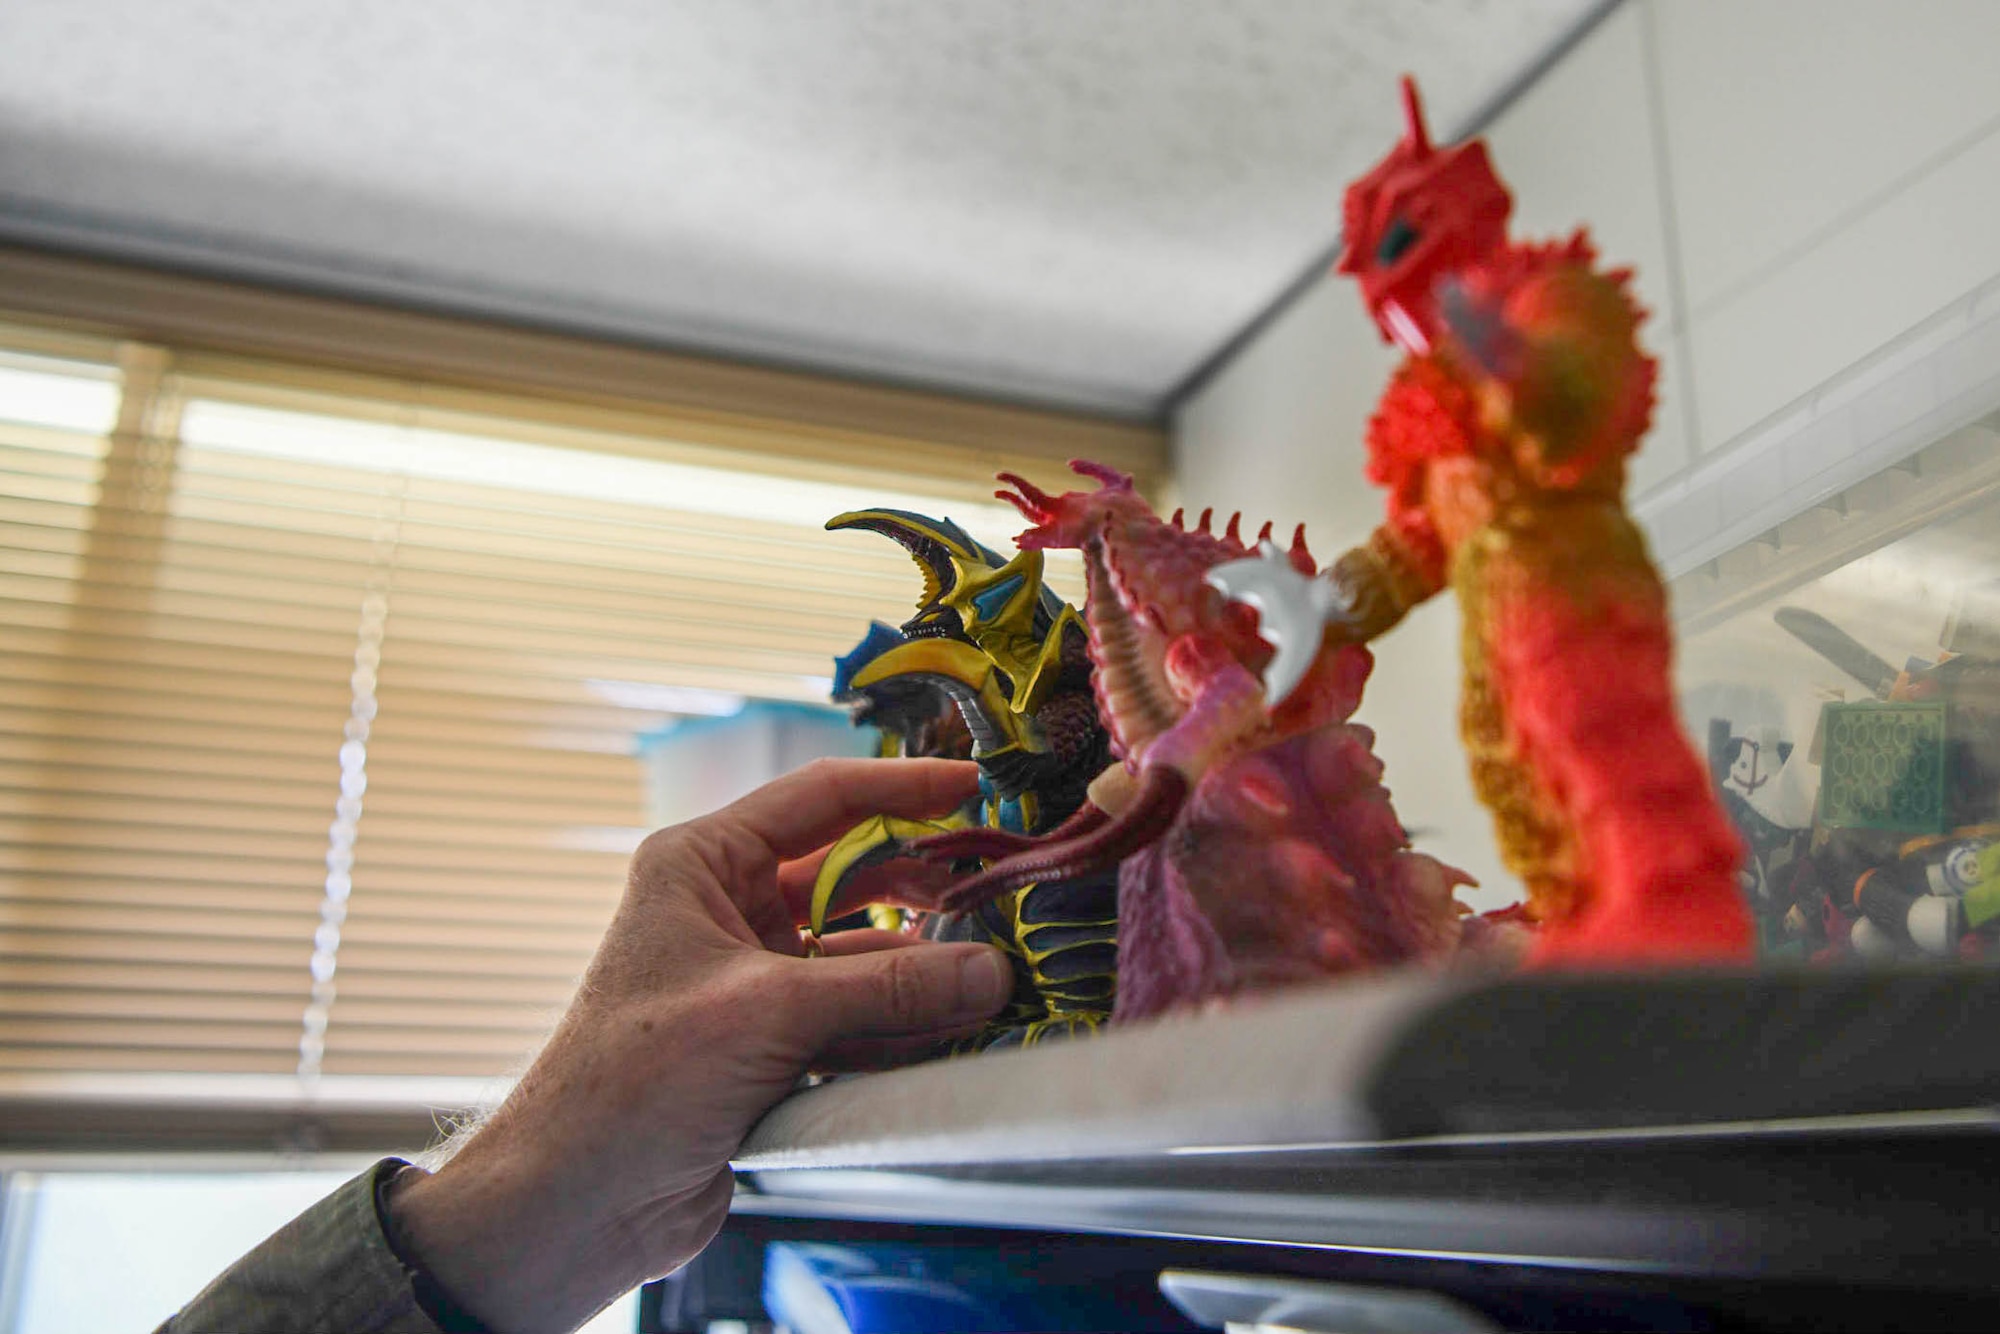 Members of the PACAF Pediatric Psychological Developmental Team demonstrate a typical day in the office.